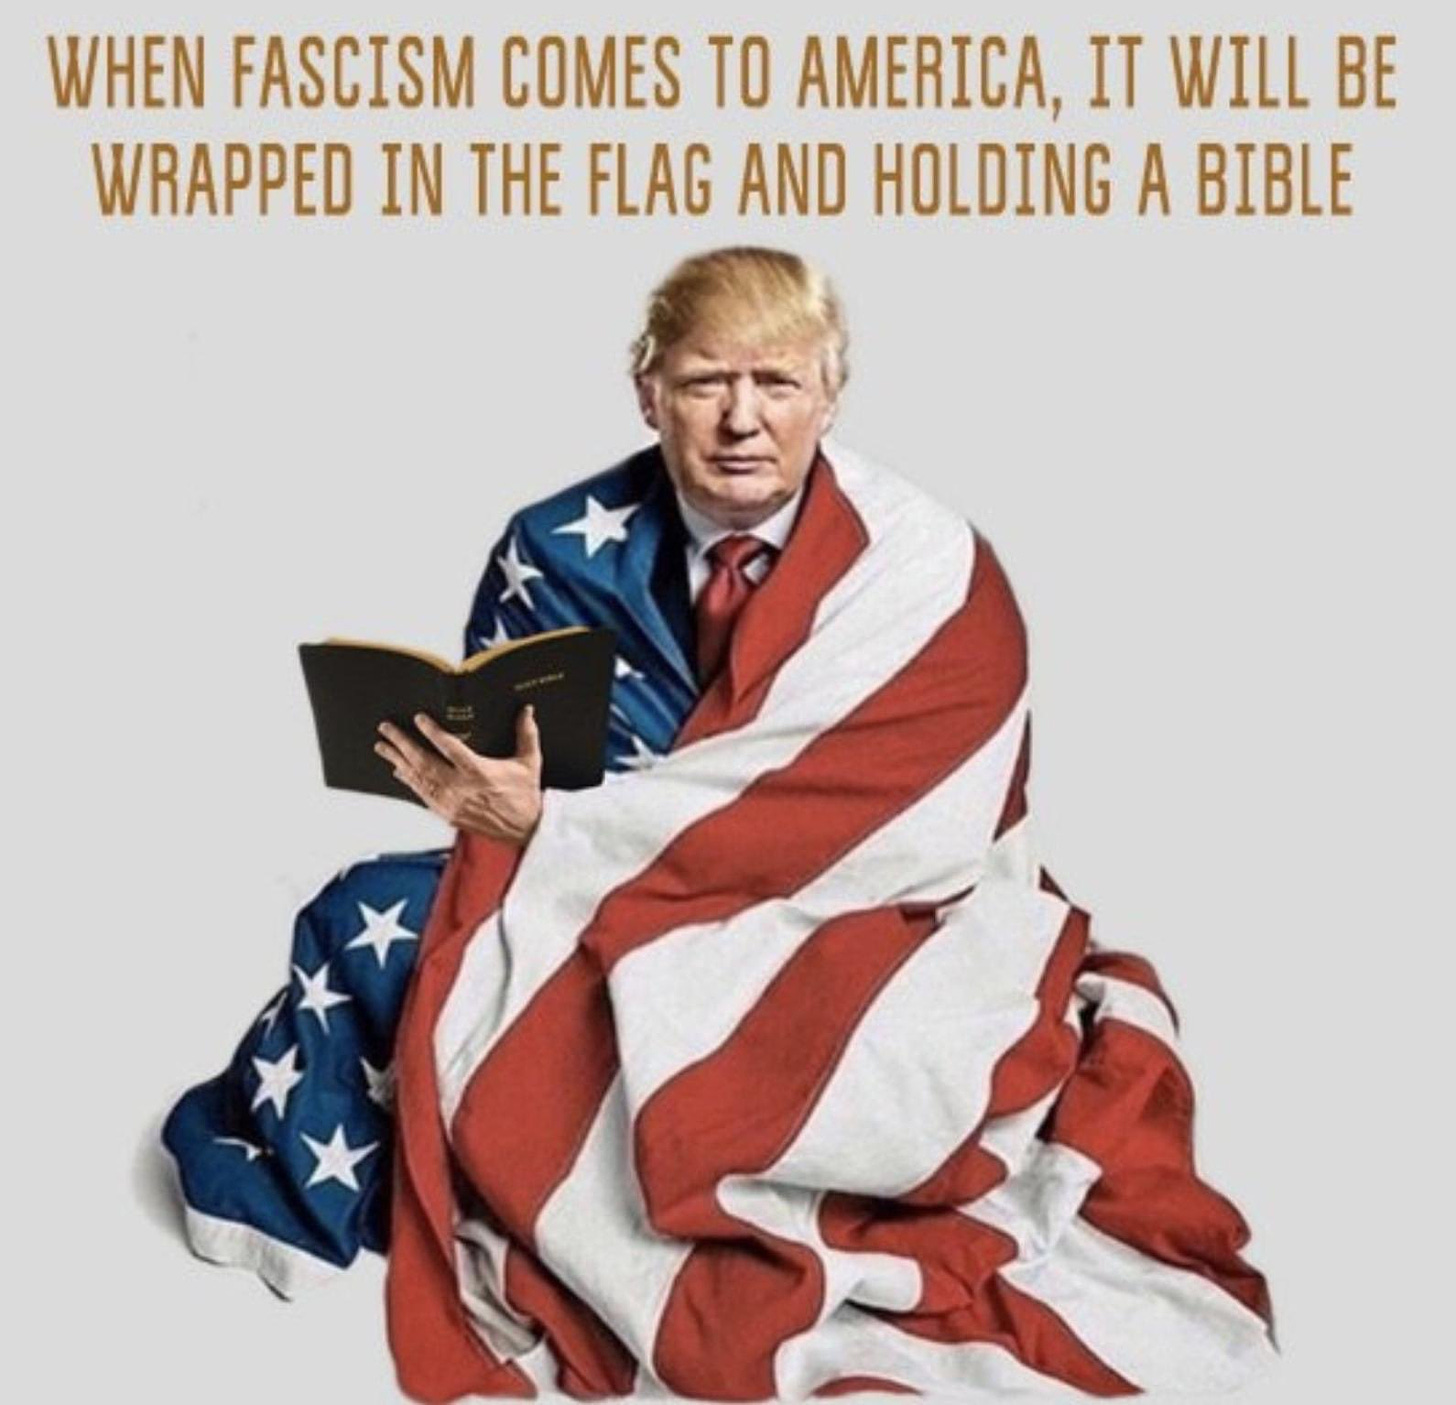 PractiCalifornia on Twitter: "@MiaFarrow @TimOBrien When Fascism comes to  America, it will be wrapped in a flag, and holding a Bible.  https://t.co/iPIlNjqZOK" / Twitter